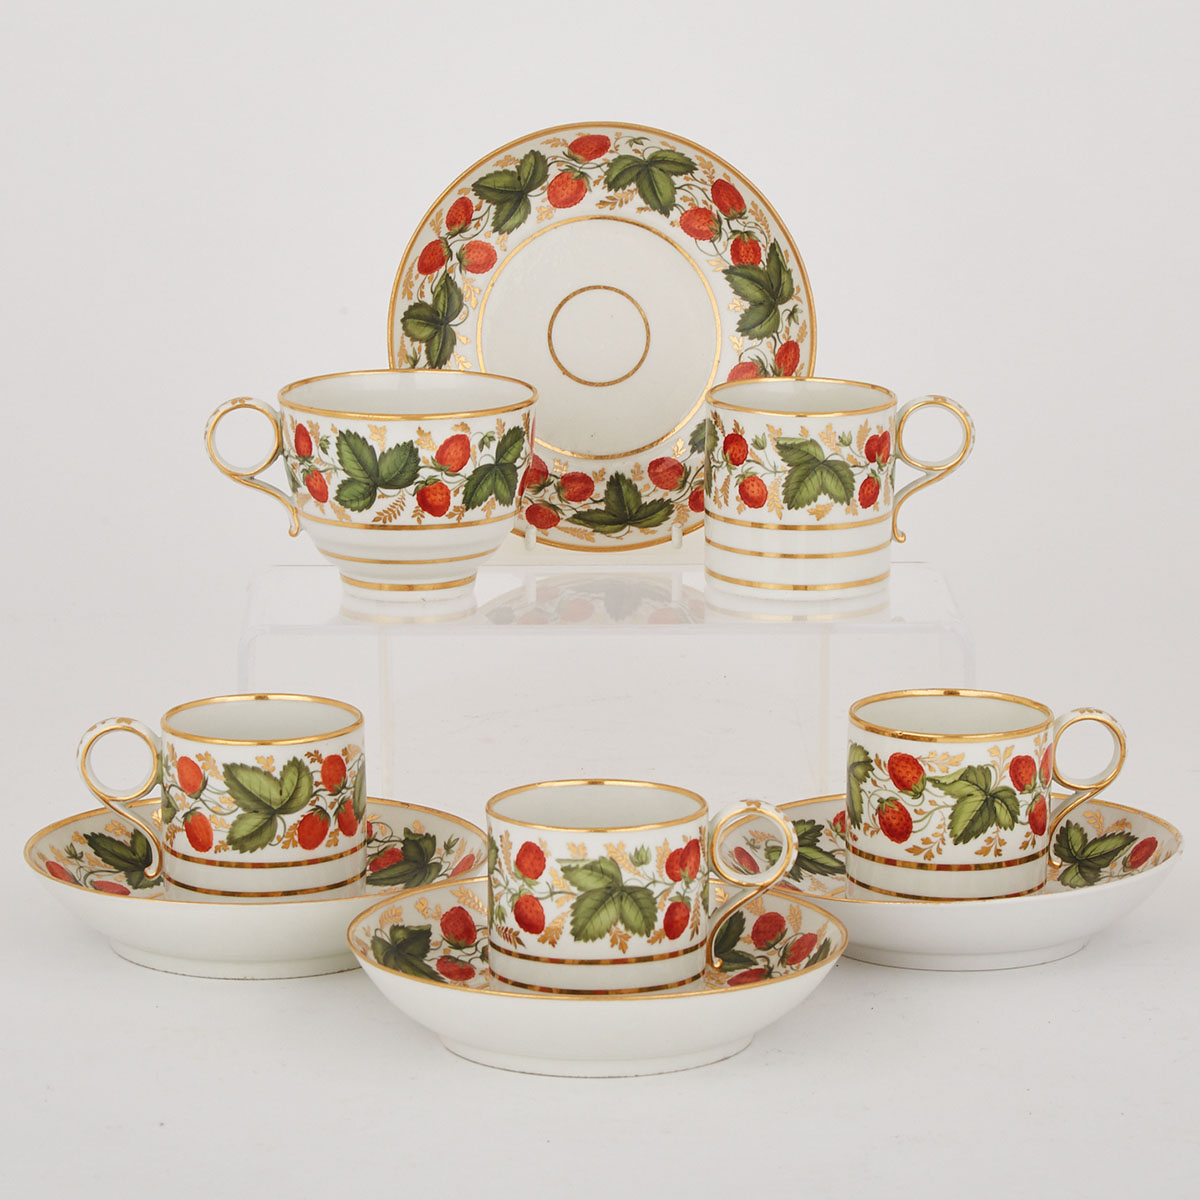 Four Flight and Barr Worcester Strawberry Banded Coffee Cans, a Cup and Four Saucers, c.1805-15